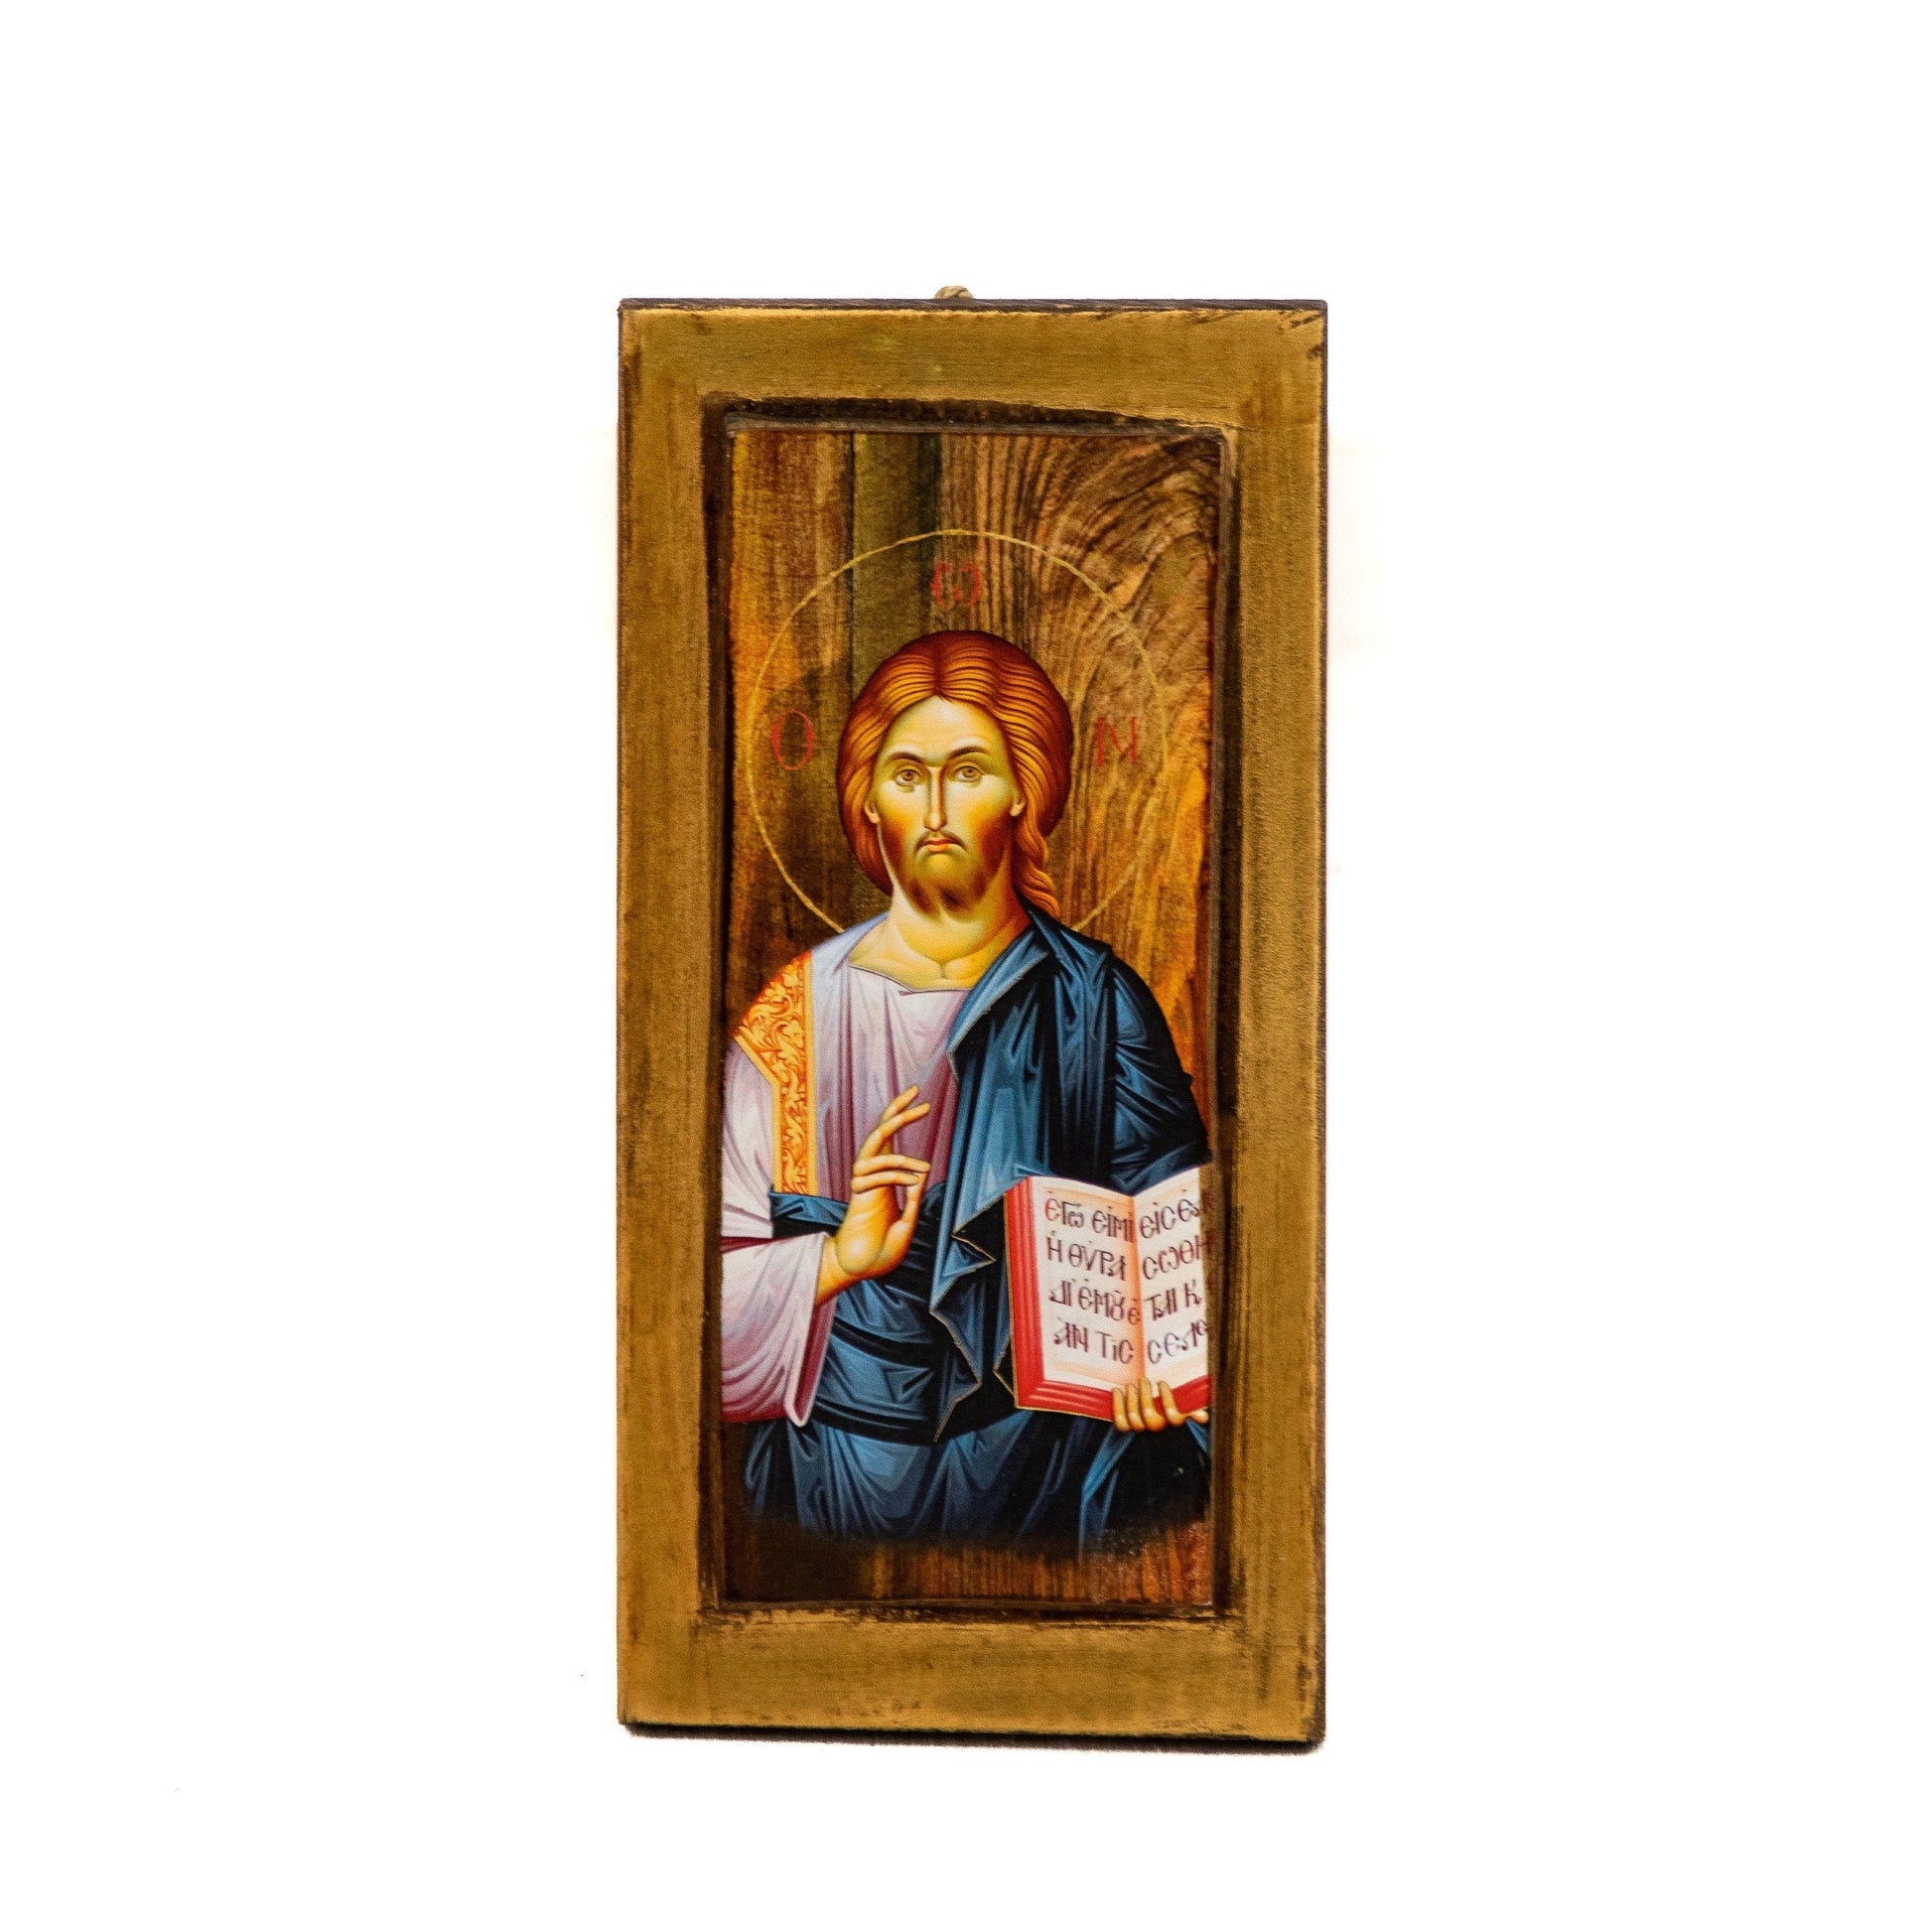 Jesus Christ icon, Handmade Greek Orthodox icon of our Lord, Byzantine art wall hanging wood plaque icon, wedding gift, religious decor TheHolyArt